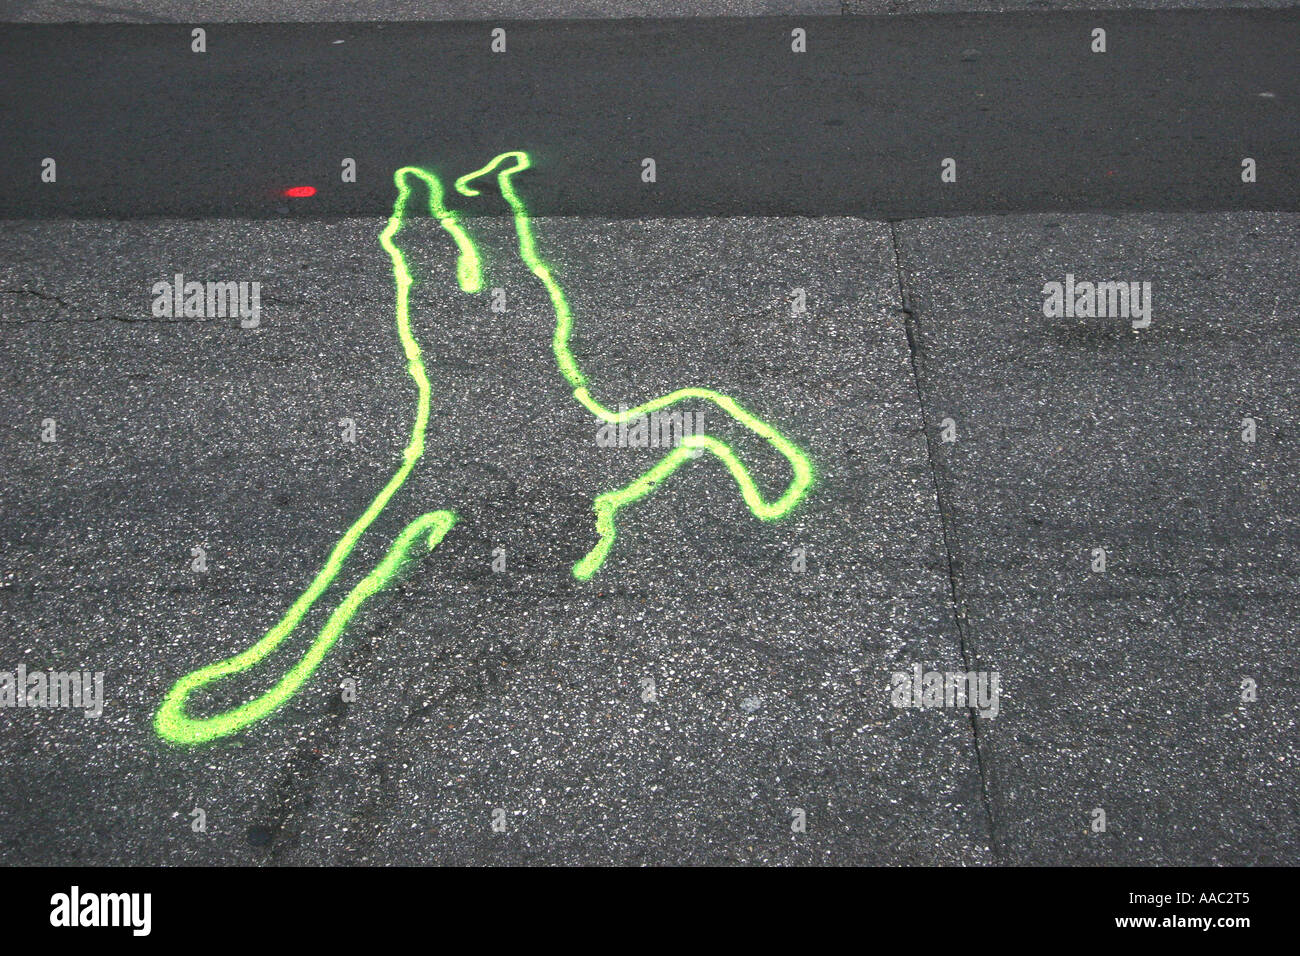 Figure drawn on the road after lethal accident Stock Photo